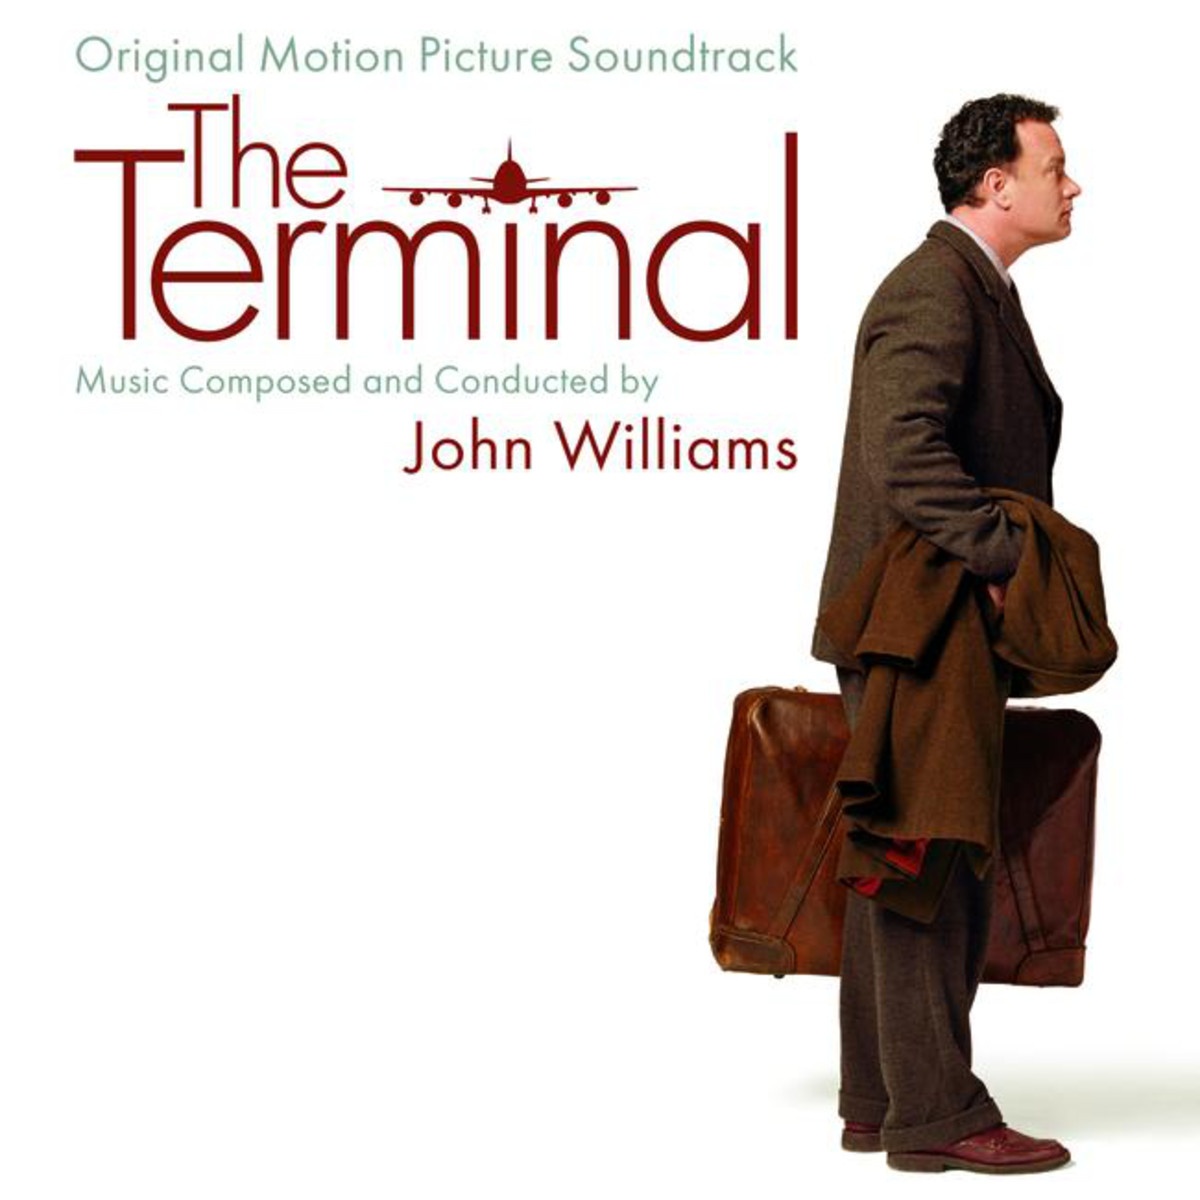 Williams: The Wedding Of Officer Torres - The Terminal/Soundtrack Version